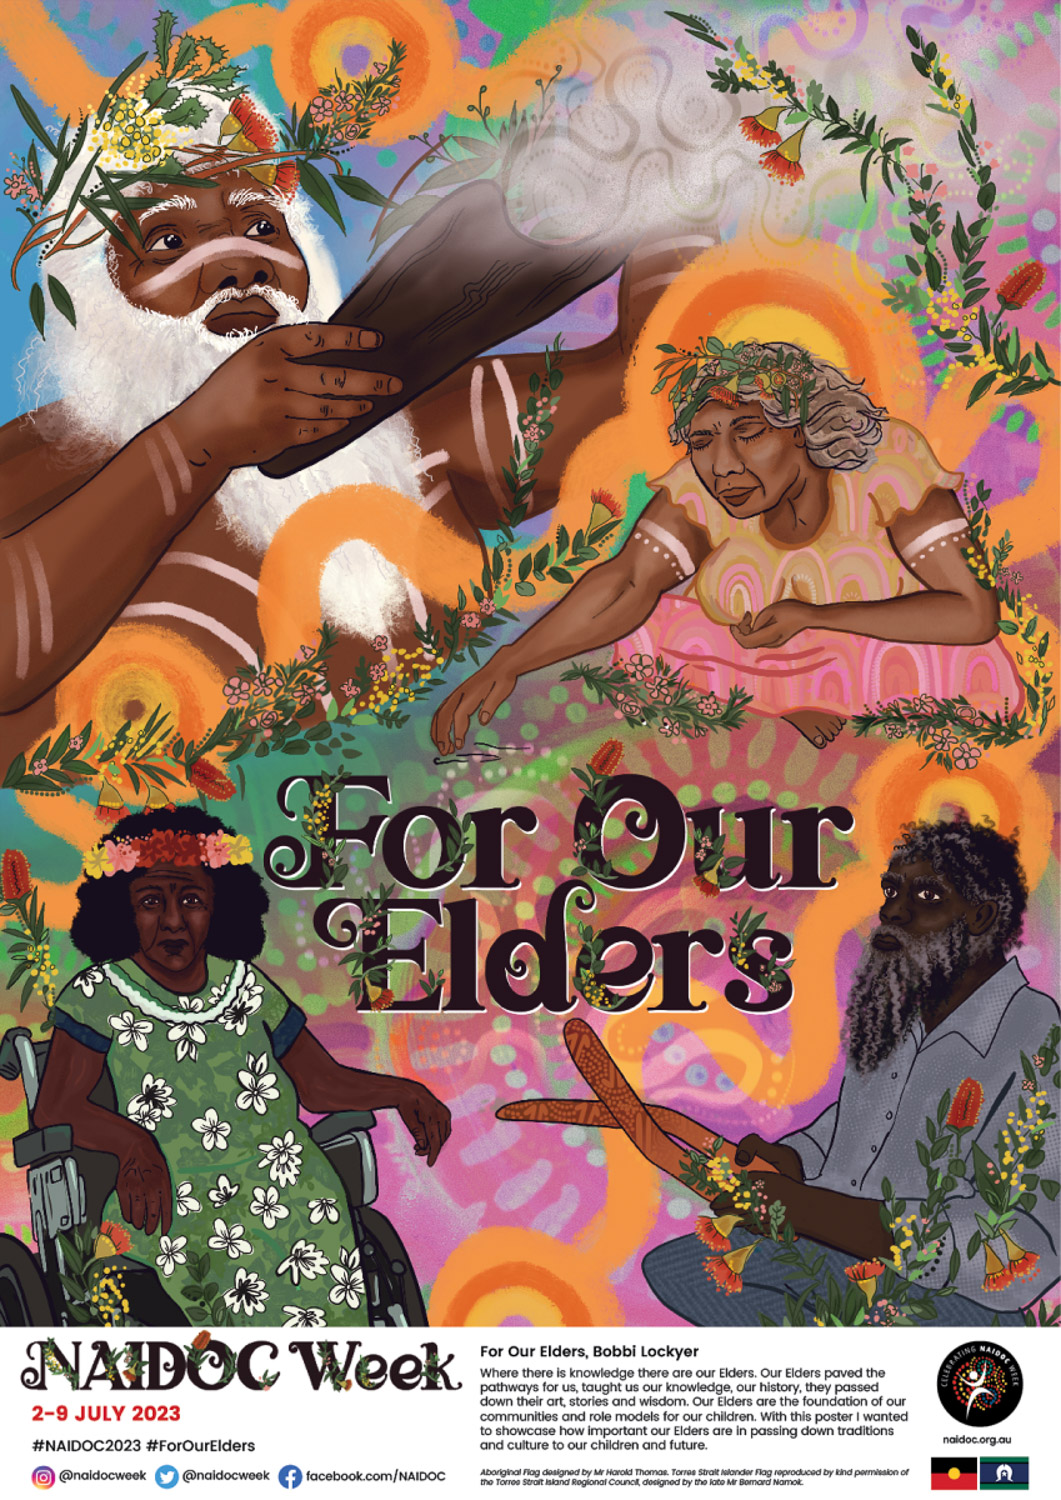 Colourful illustration of four Aboriginal elders and the wordsr "For Our Elders". Below the image is the words NAIDOC Week 2-9 July 2023